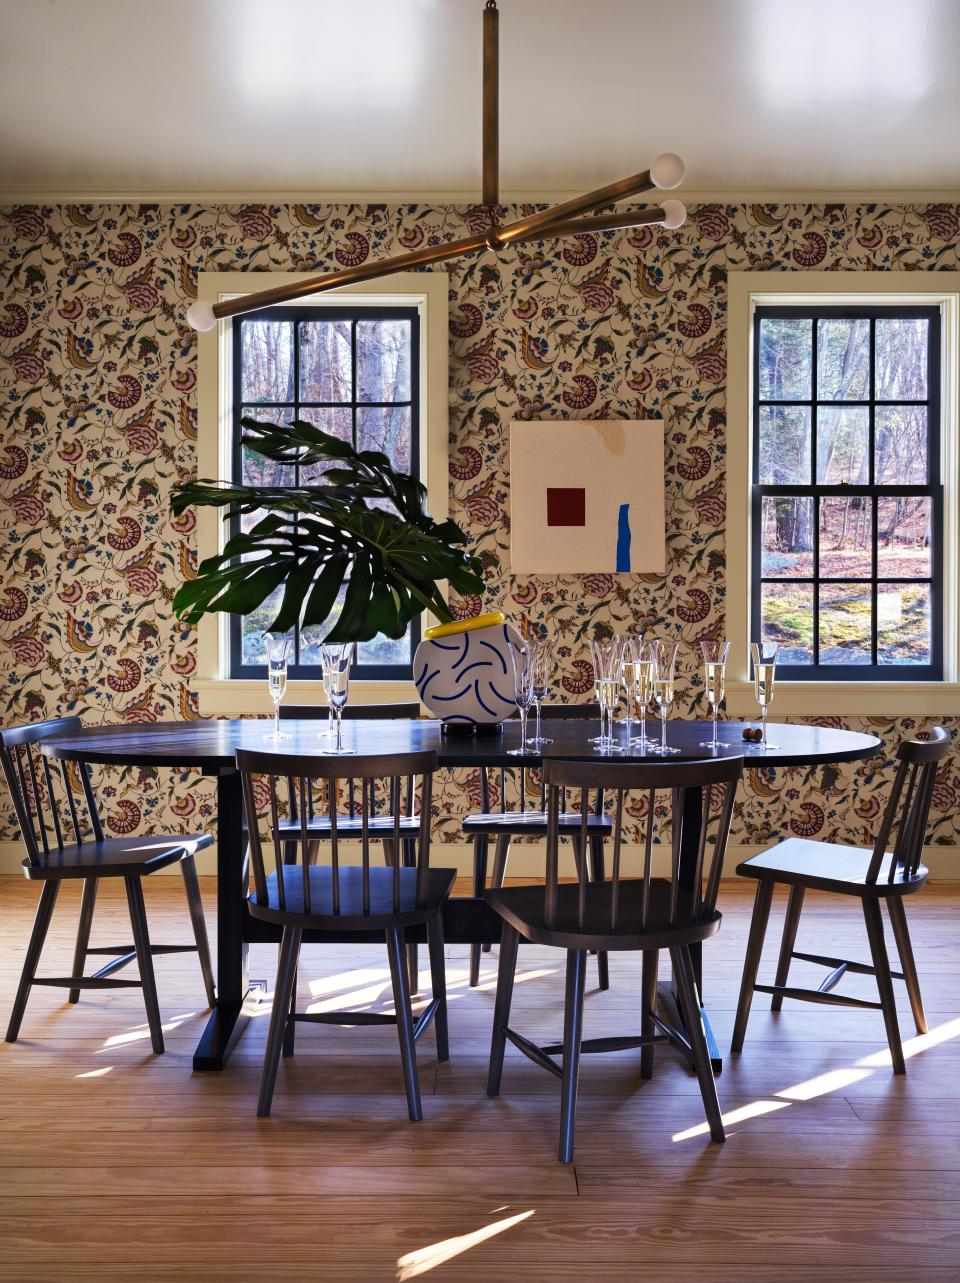 In the dining room, Antoinette Poisson wallpaper, Apparatus ceiling light, and table and chairs by O&G studio.